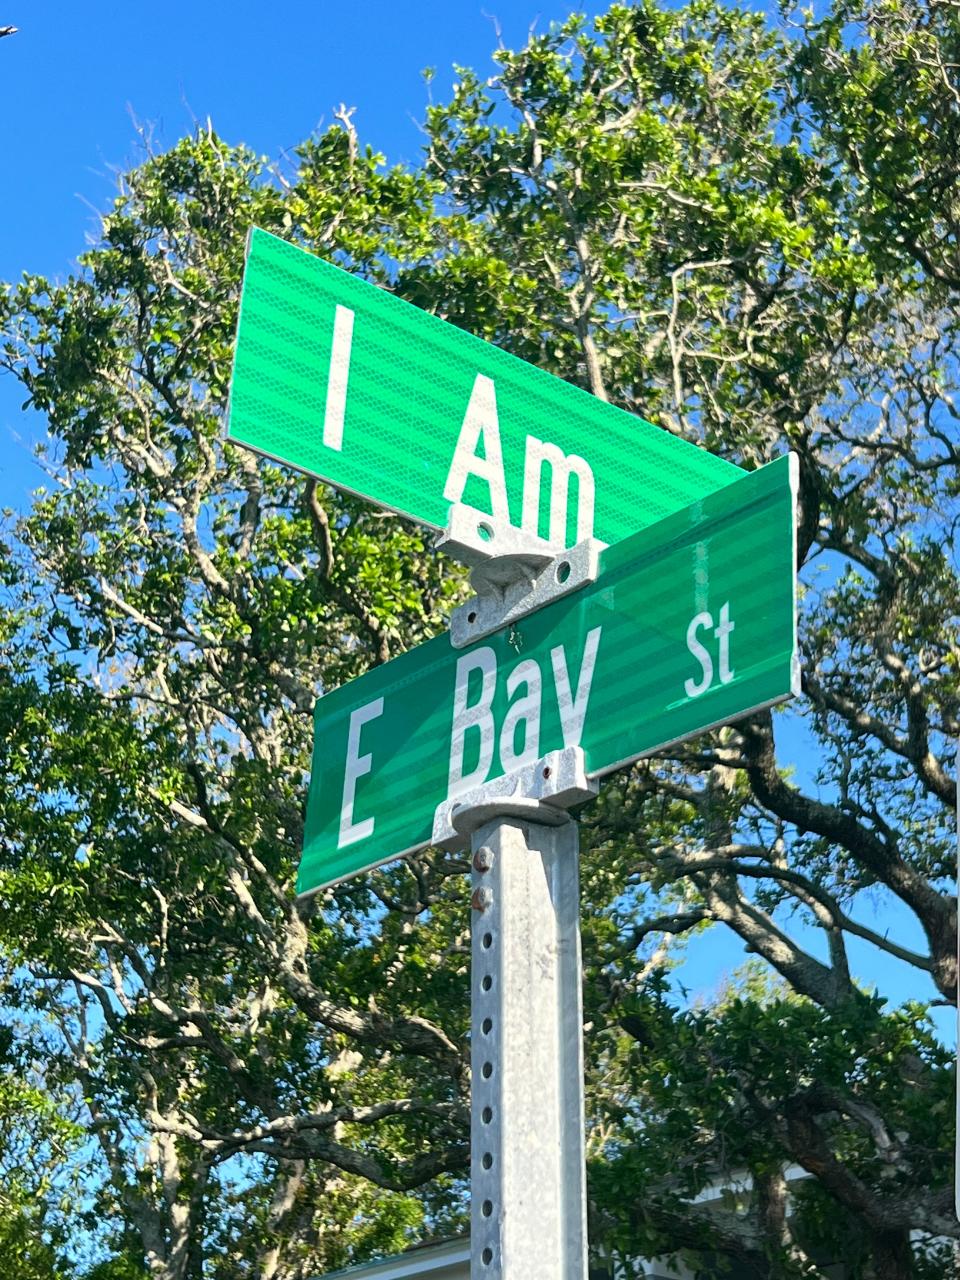 I Am Street is a small alleyway that runs between Howe and East Bay streets.